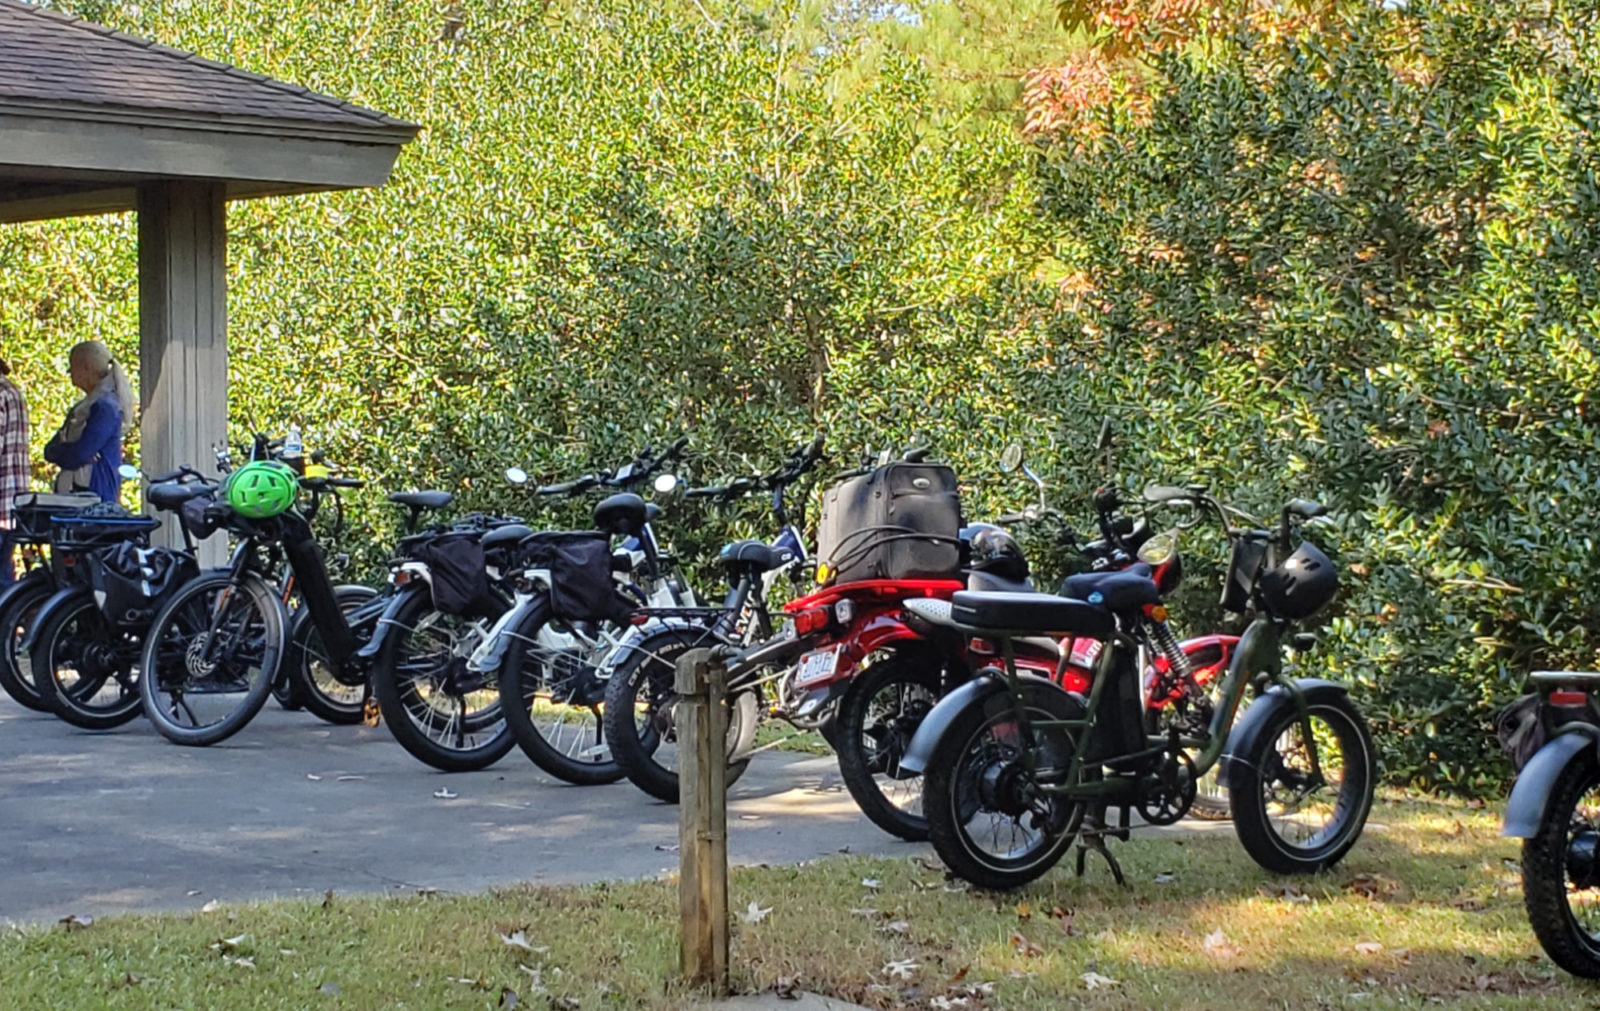 E-bikes in the parking lot